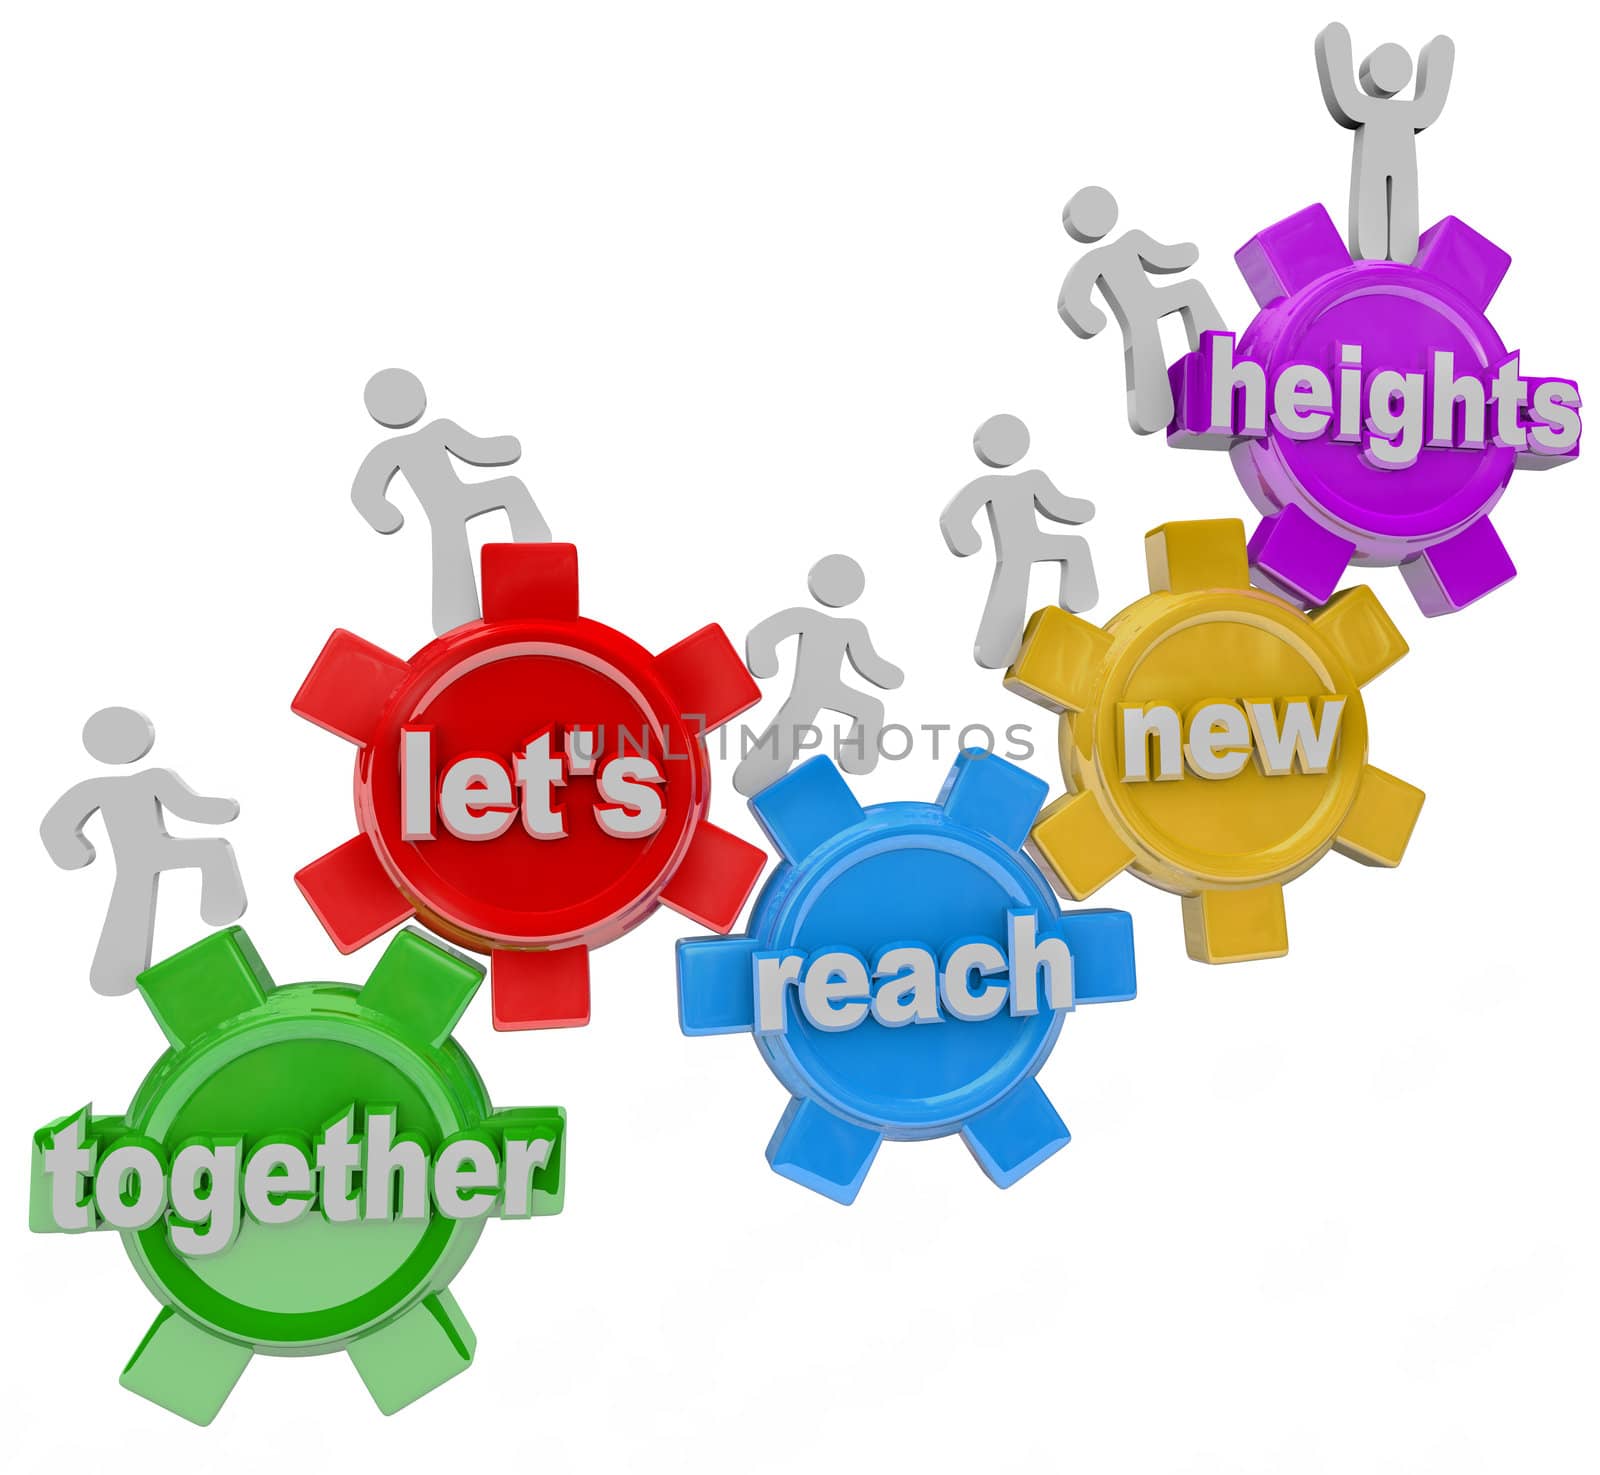 Together Let's Reach New Heights Team on Gears by iQoncept